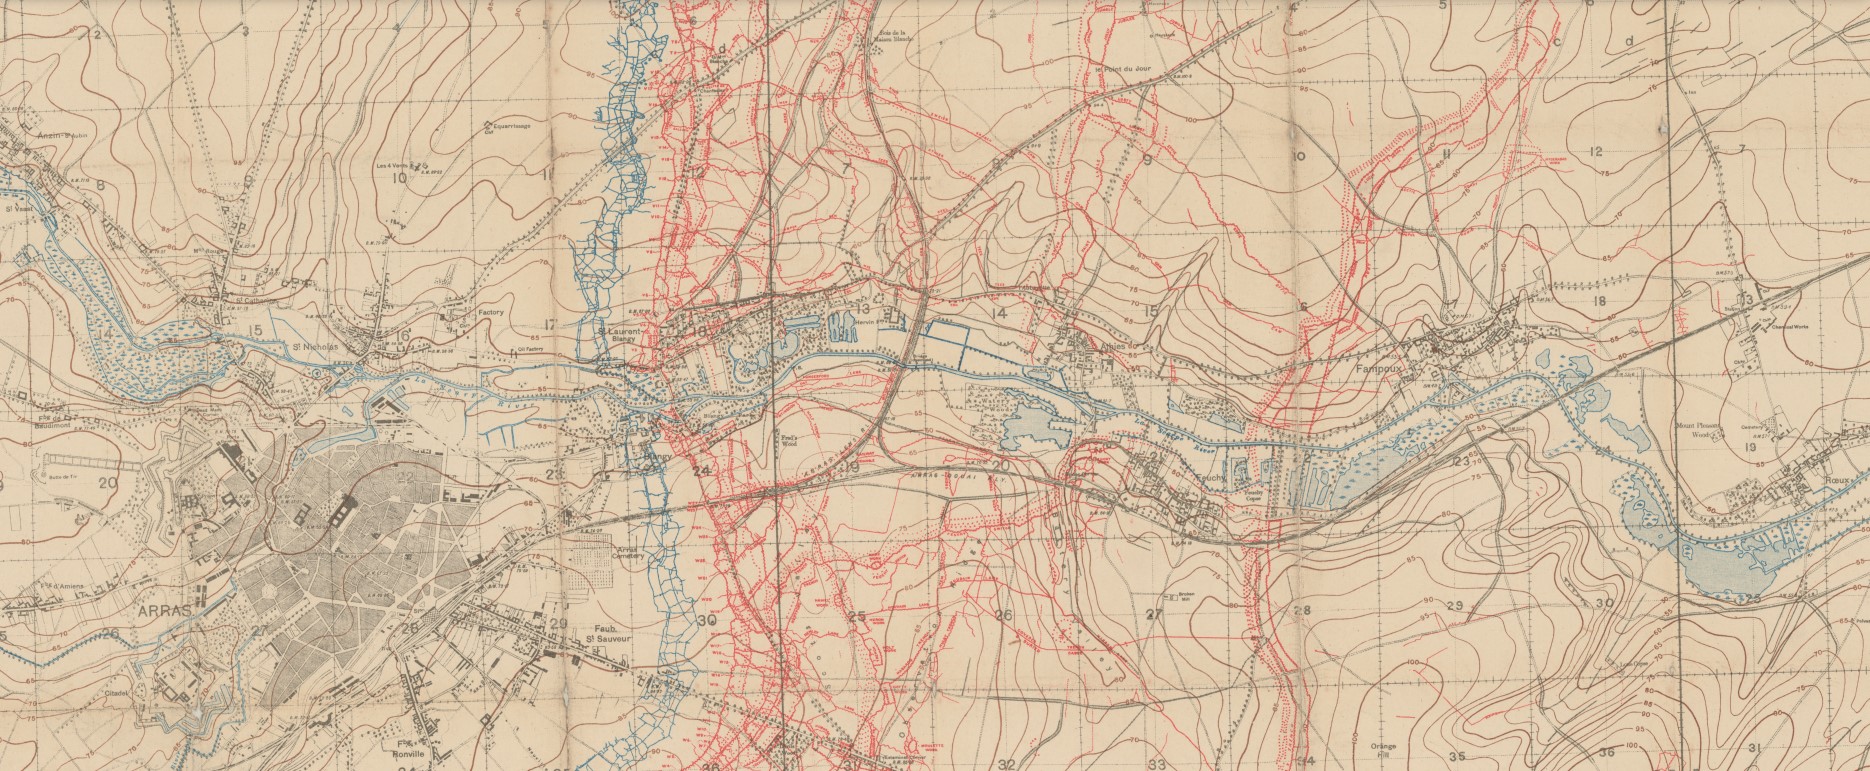 NLS WWI Trench Map Arras 1917 03 04